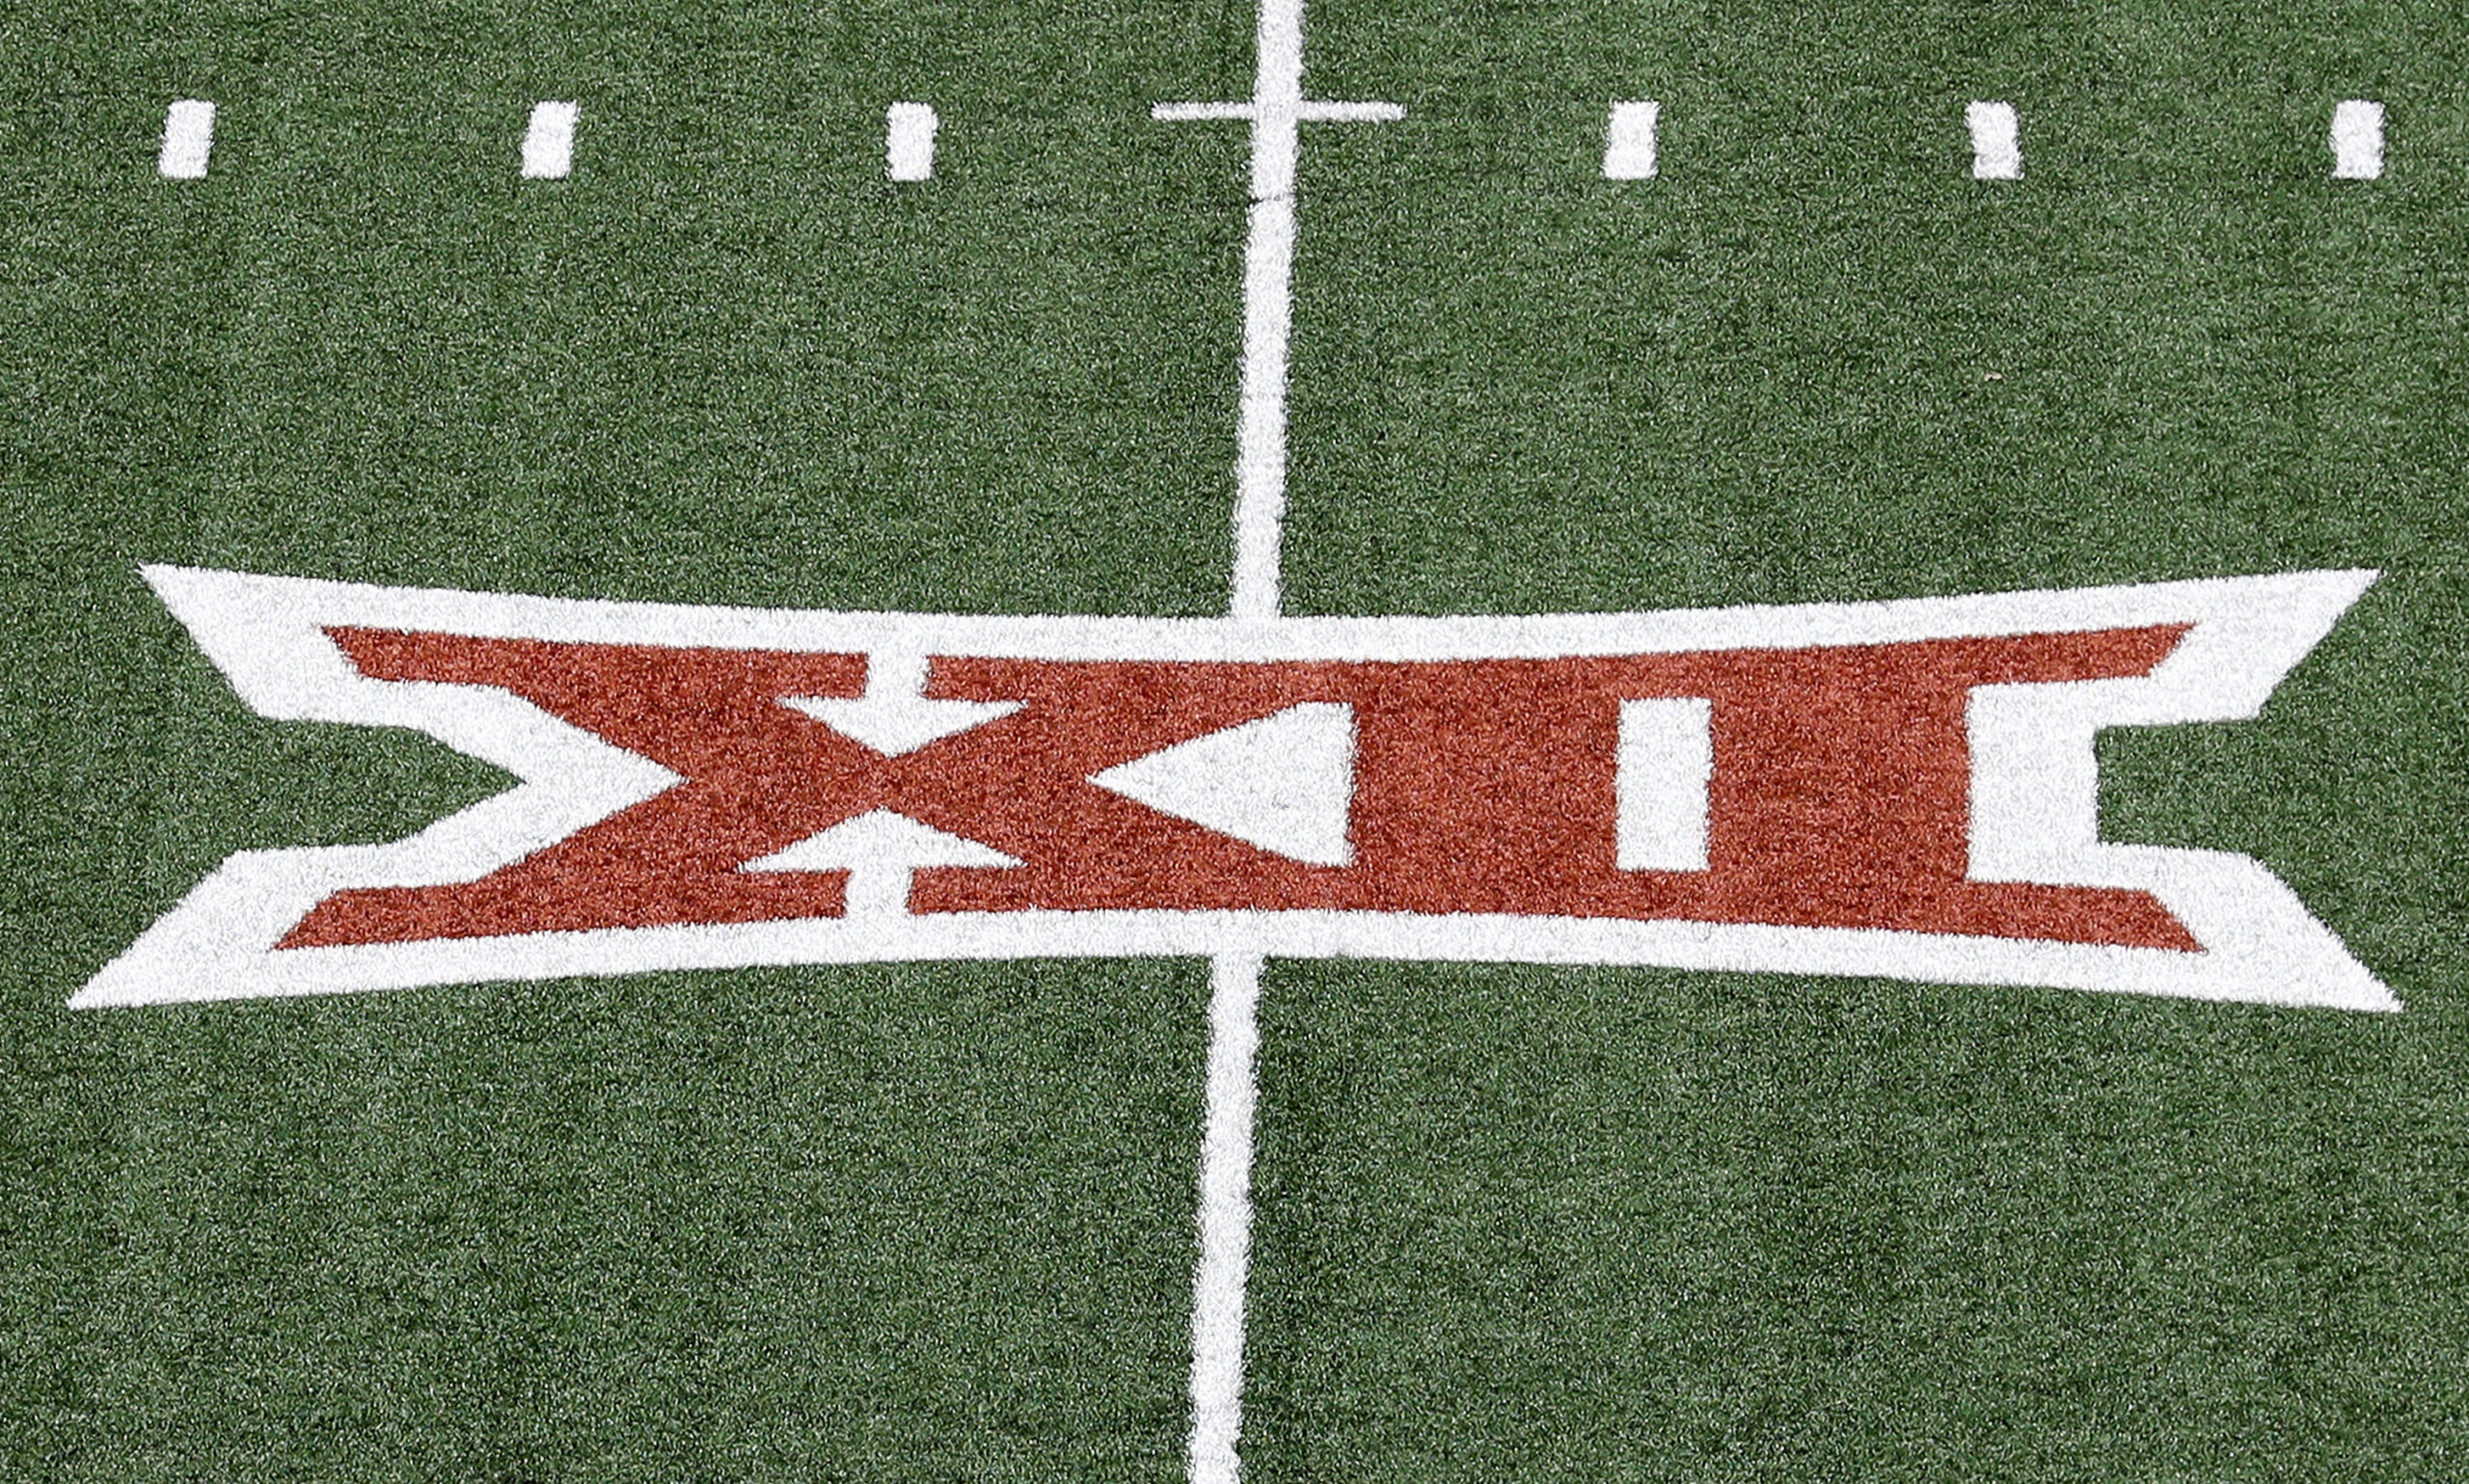 Big 12 Pro Day: Will The Innovative Event Be A Success? - Gridiron Heroics